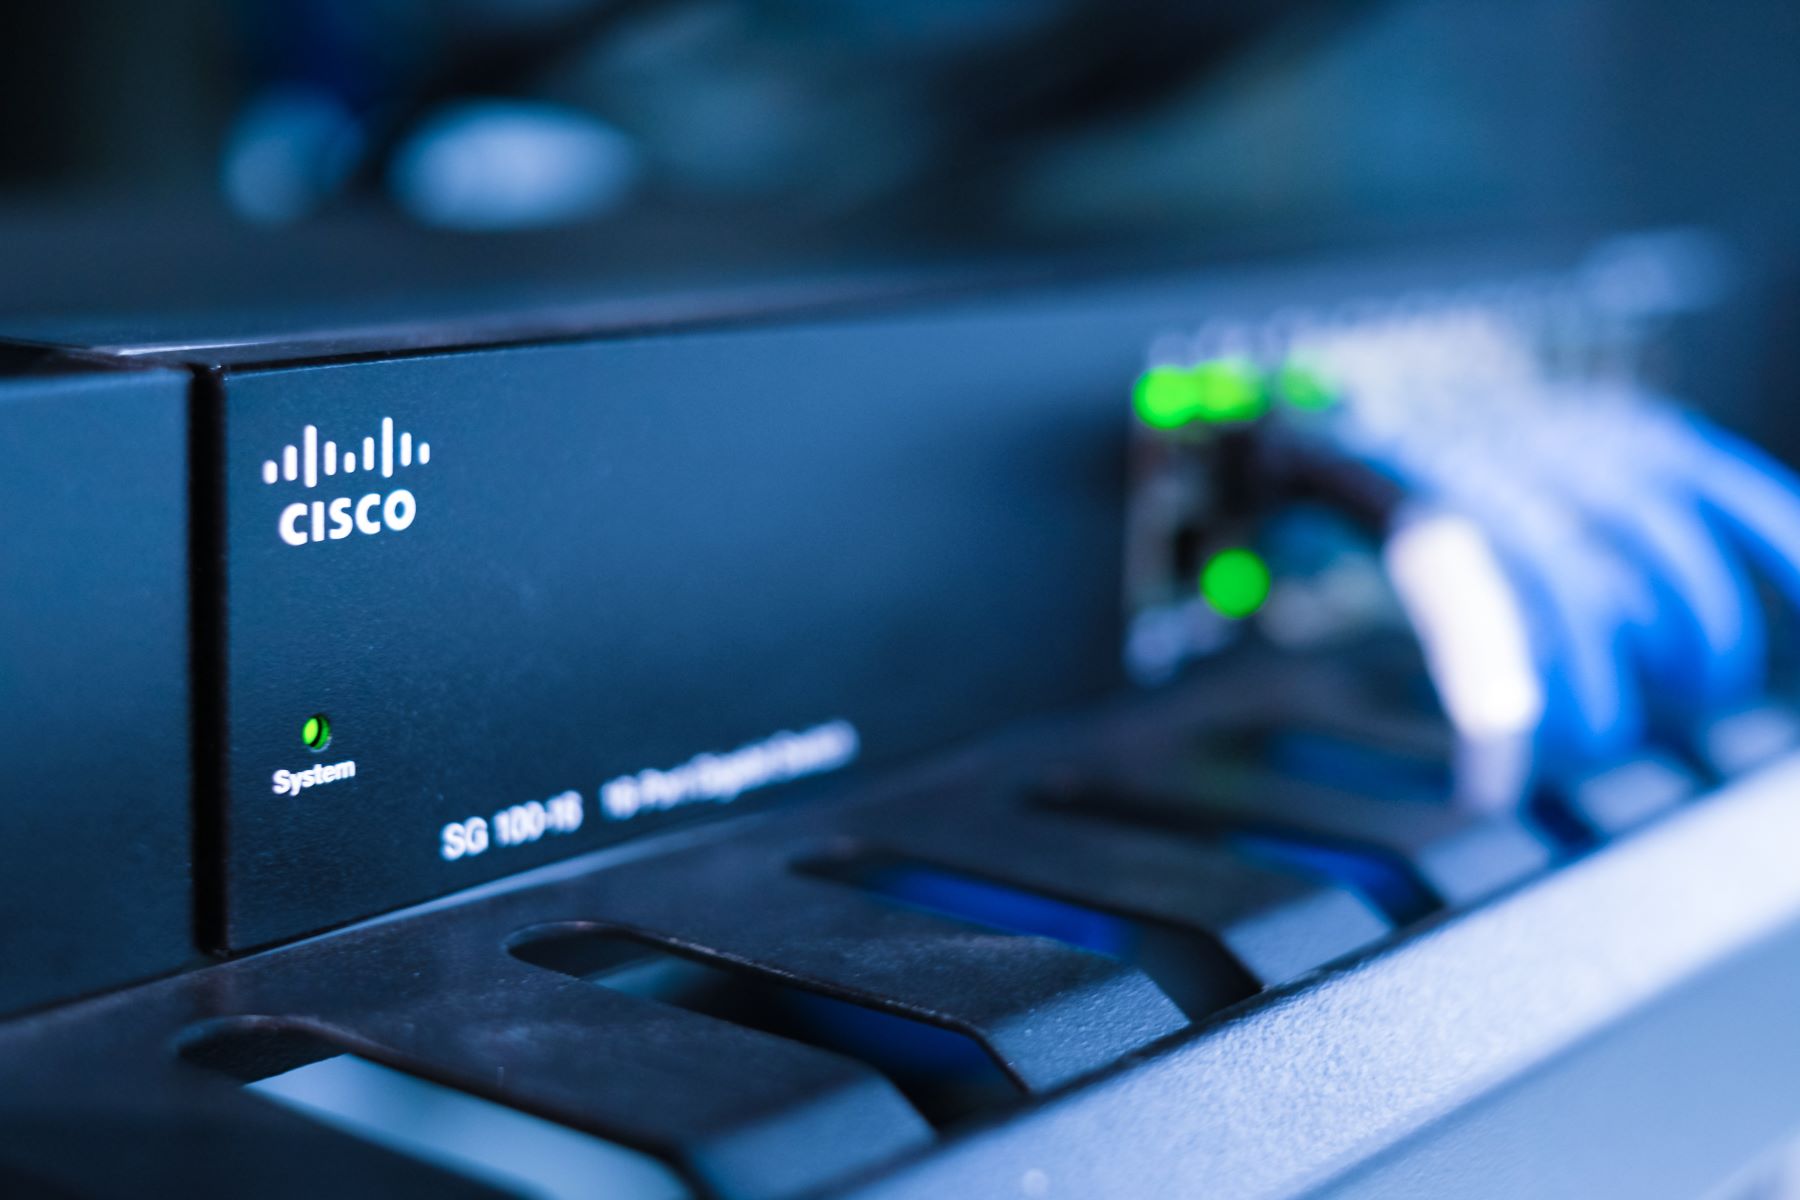 How To Configure Cisco Routers